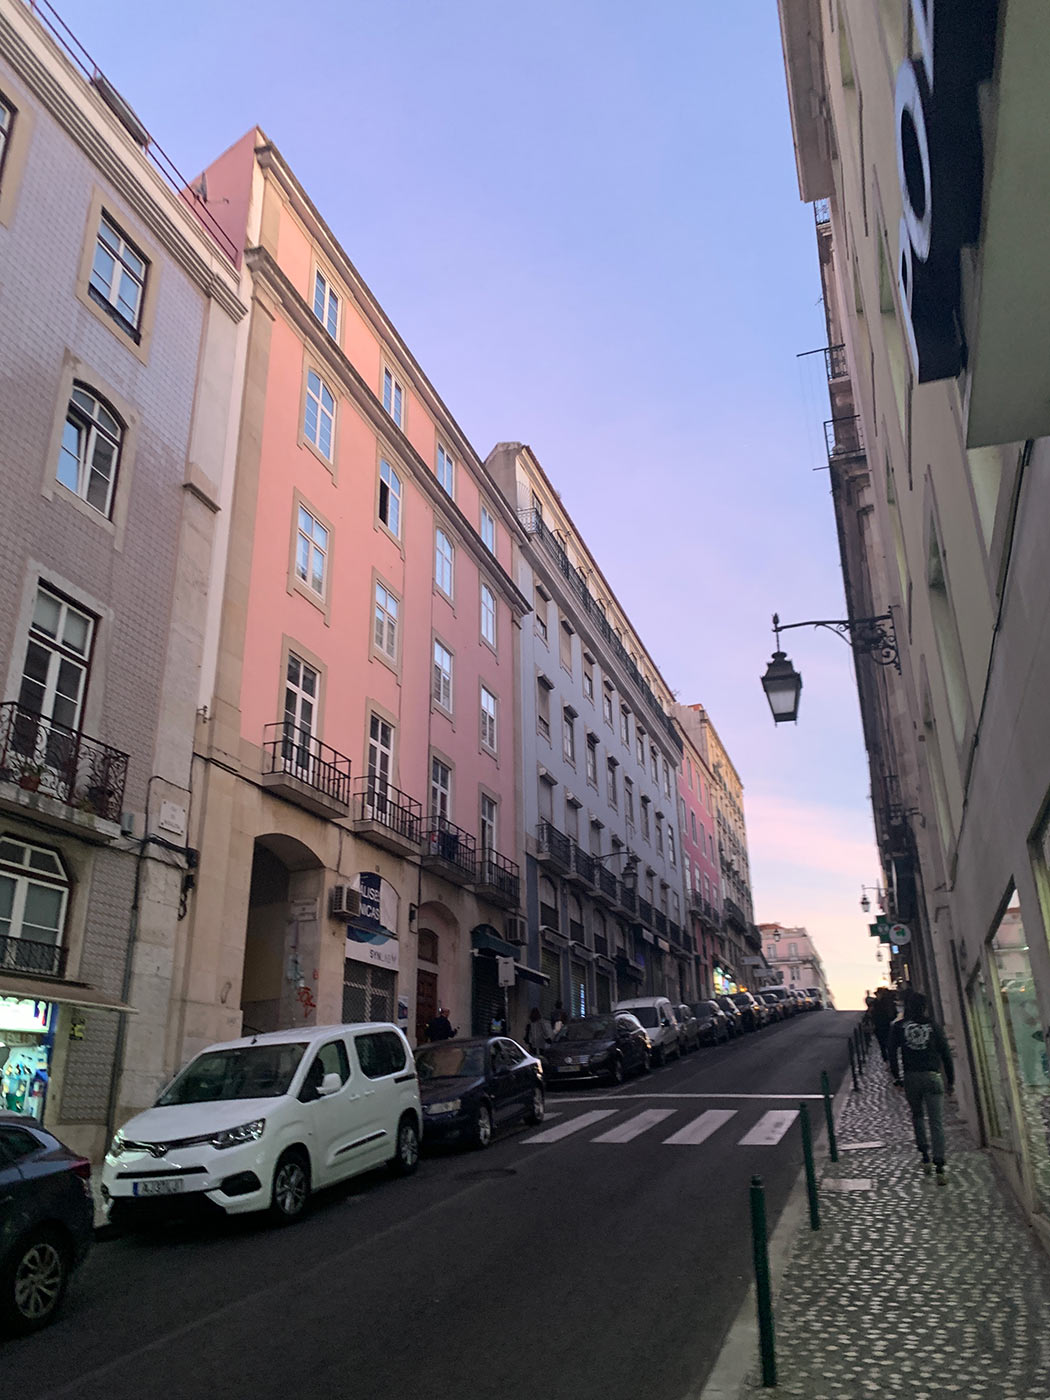 walking the streets in lisbon portugal